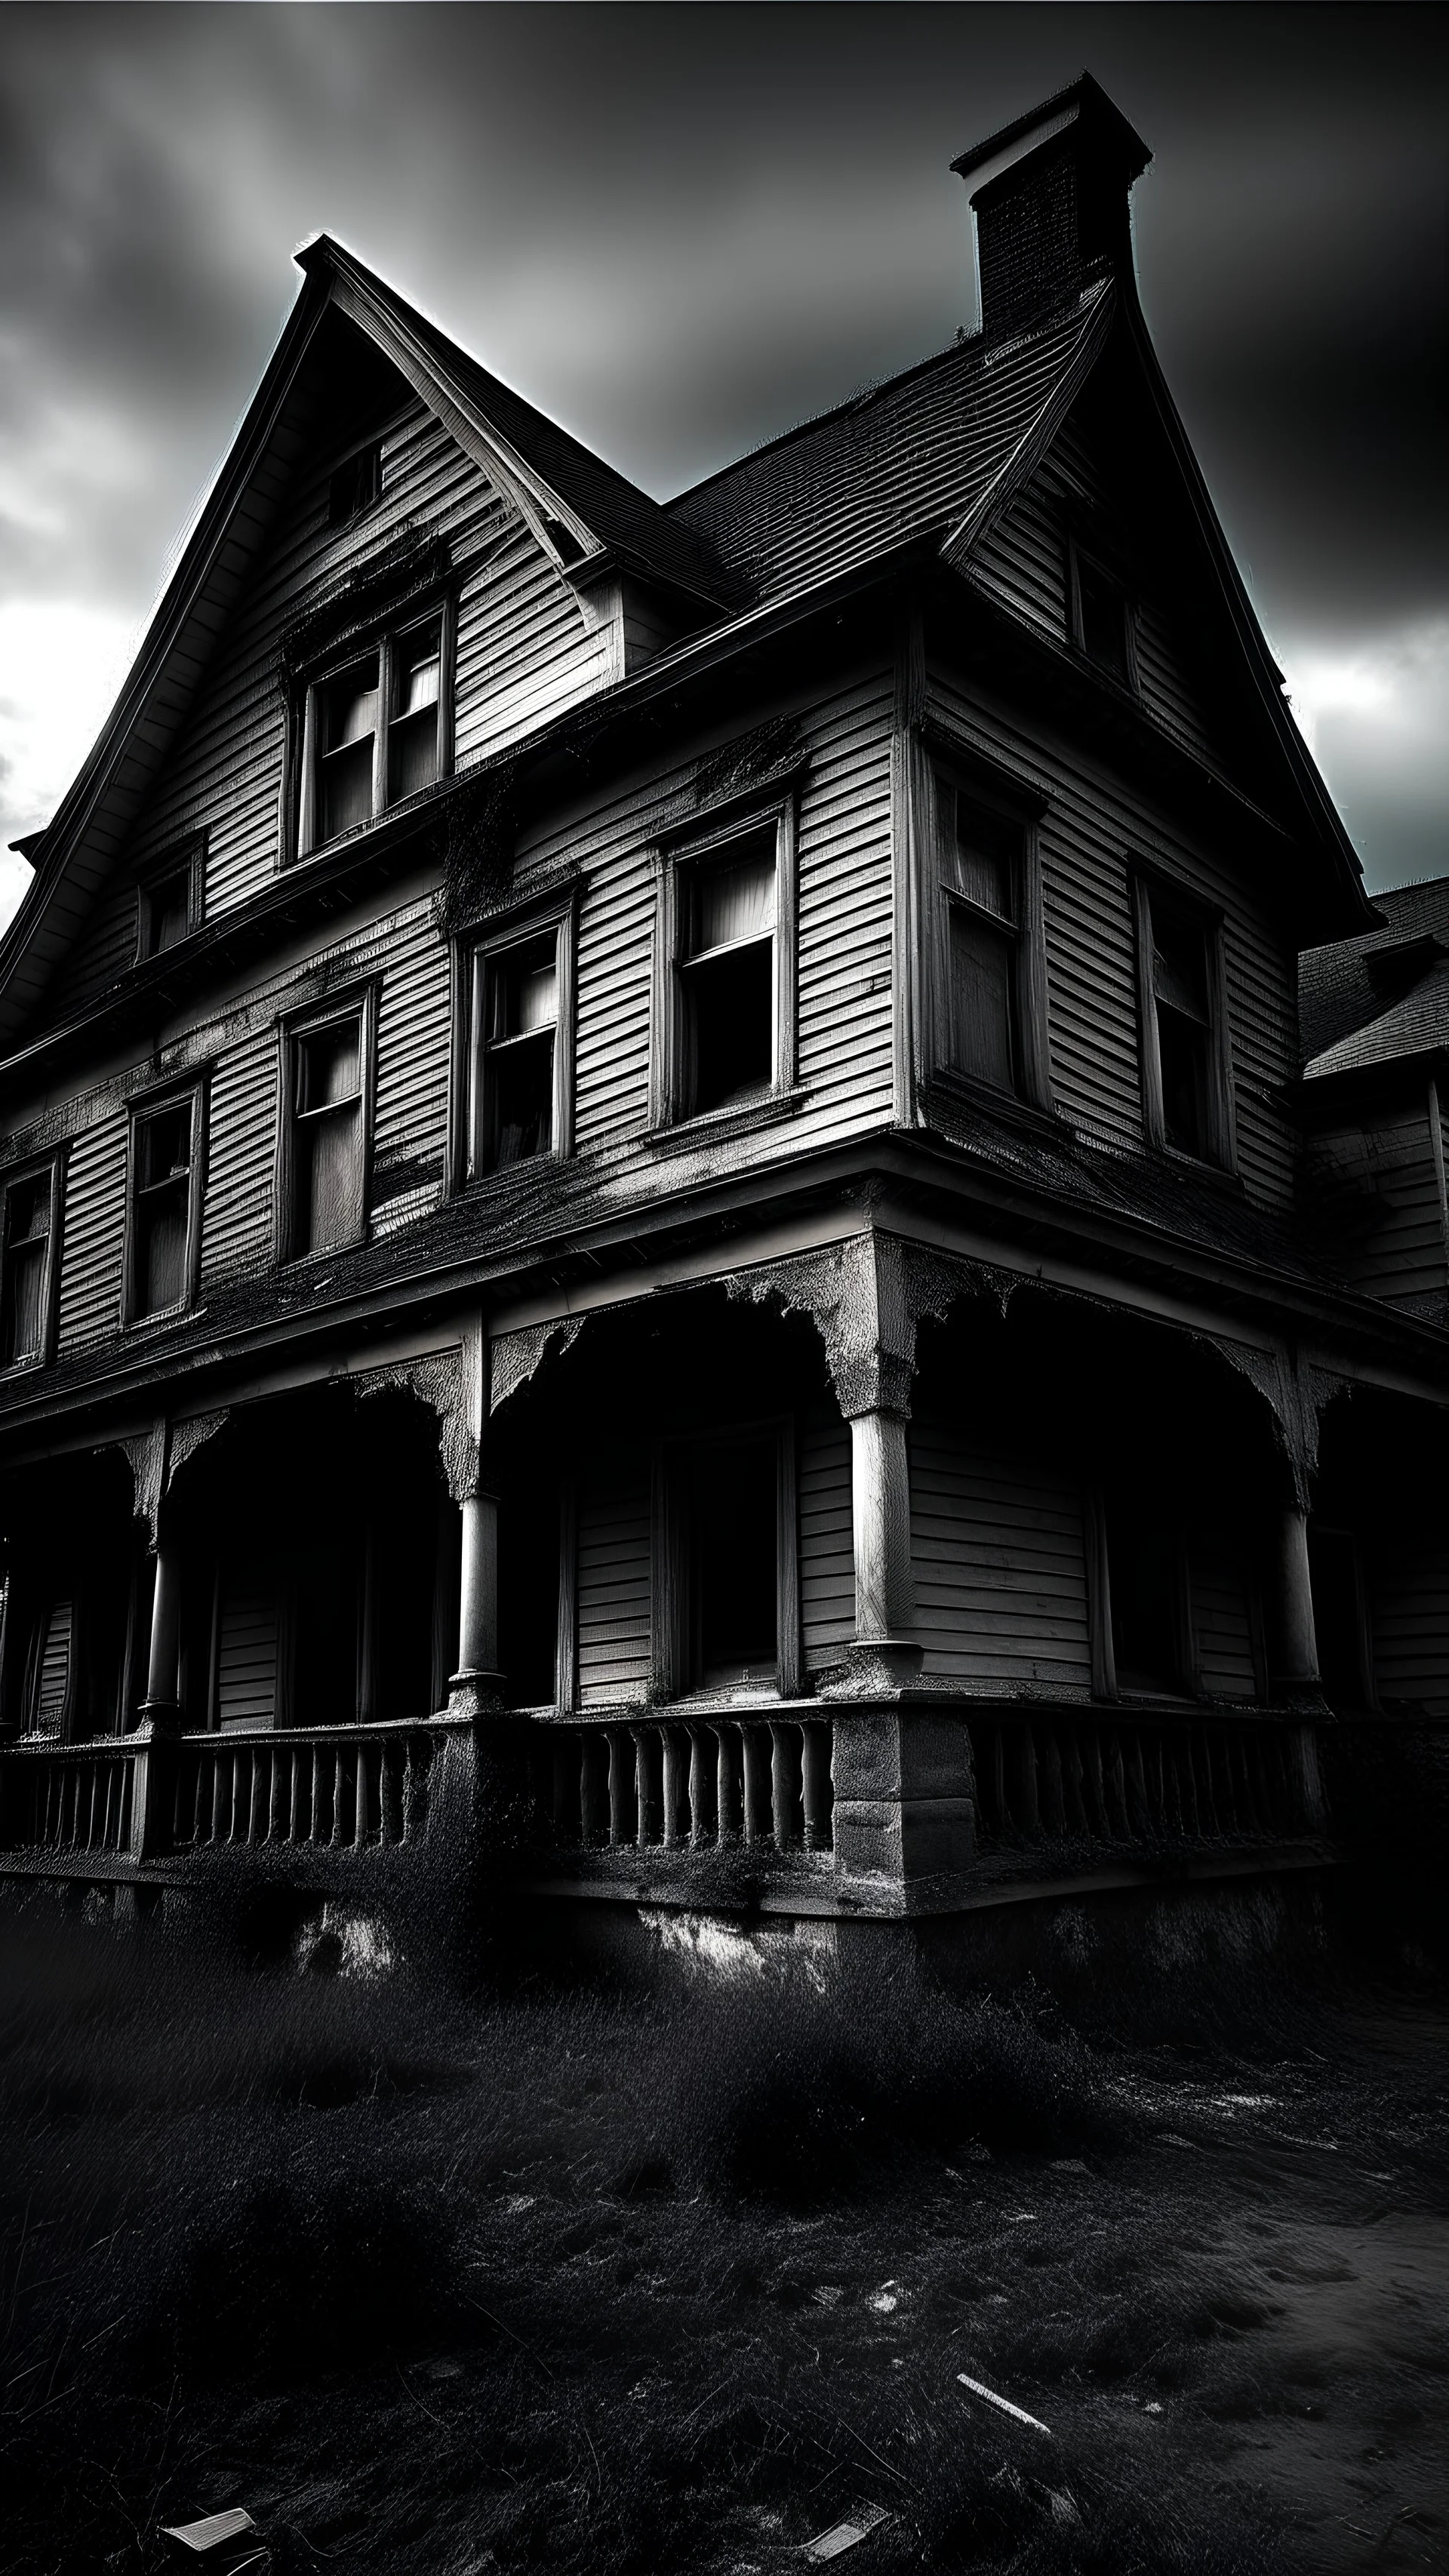 In this closing chapter, the description describes Jason's immediate departure from the haunted house after the full horror experience. Jason never turns back and never returns to the old house. The description now shows the house as an abandoned place again, where it silently waits alone, ready to receive new victims who dare to enter it and reveal its dark secrets. The conclusion highlights the mystery and suspense about the fate of the house and the terrible events that can await those who ar